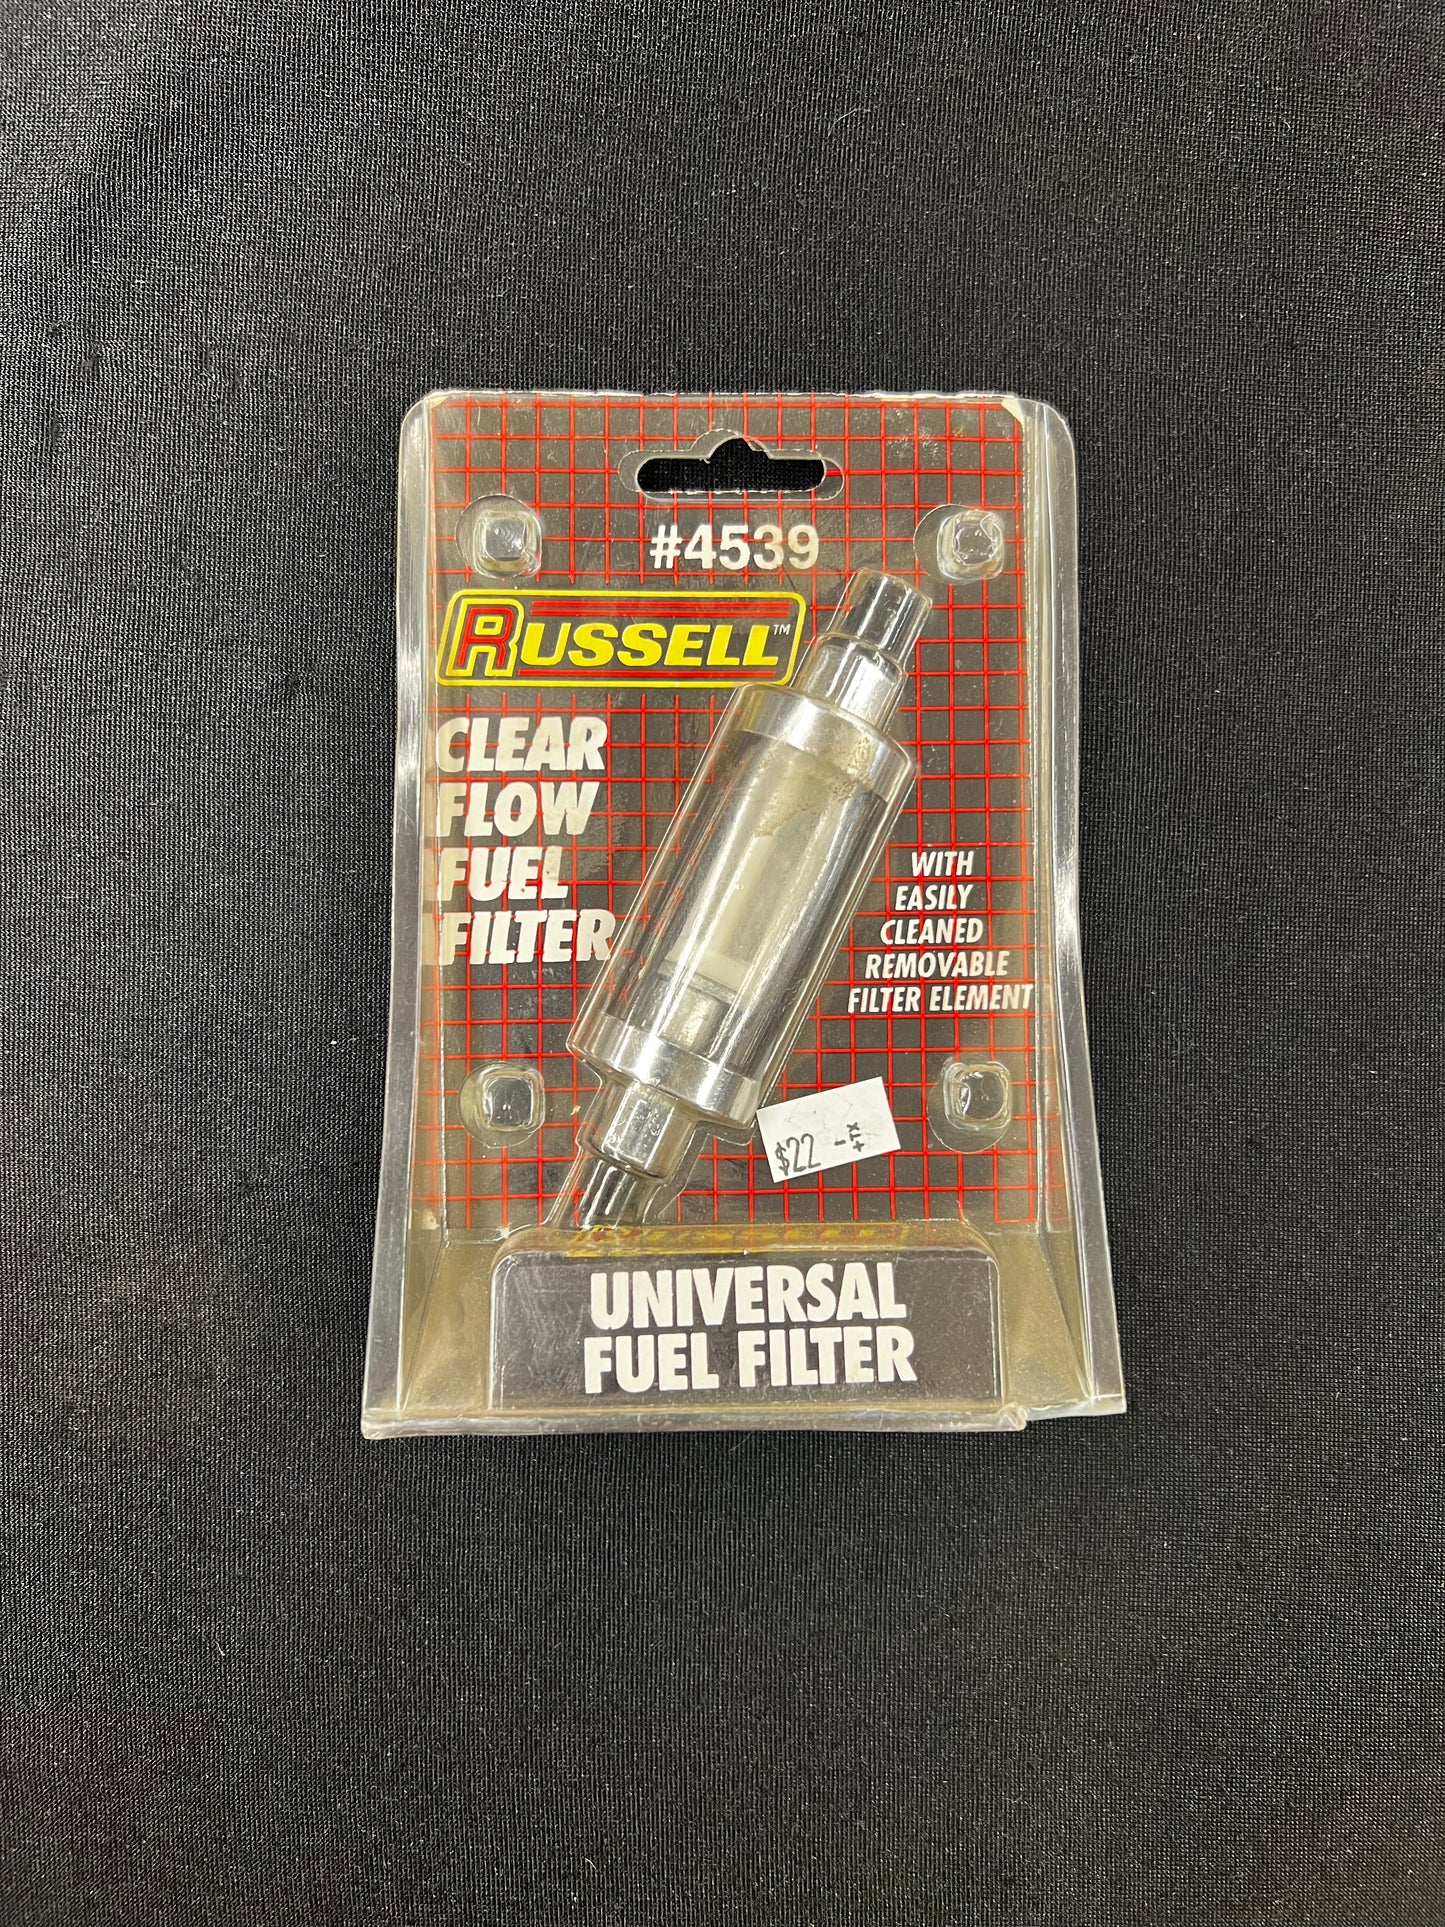 Russell Clear Flow Universal Fuel Filter #4539